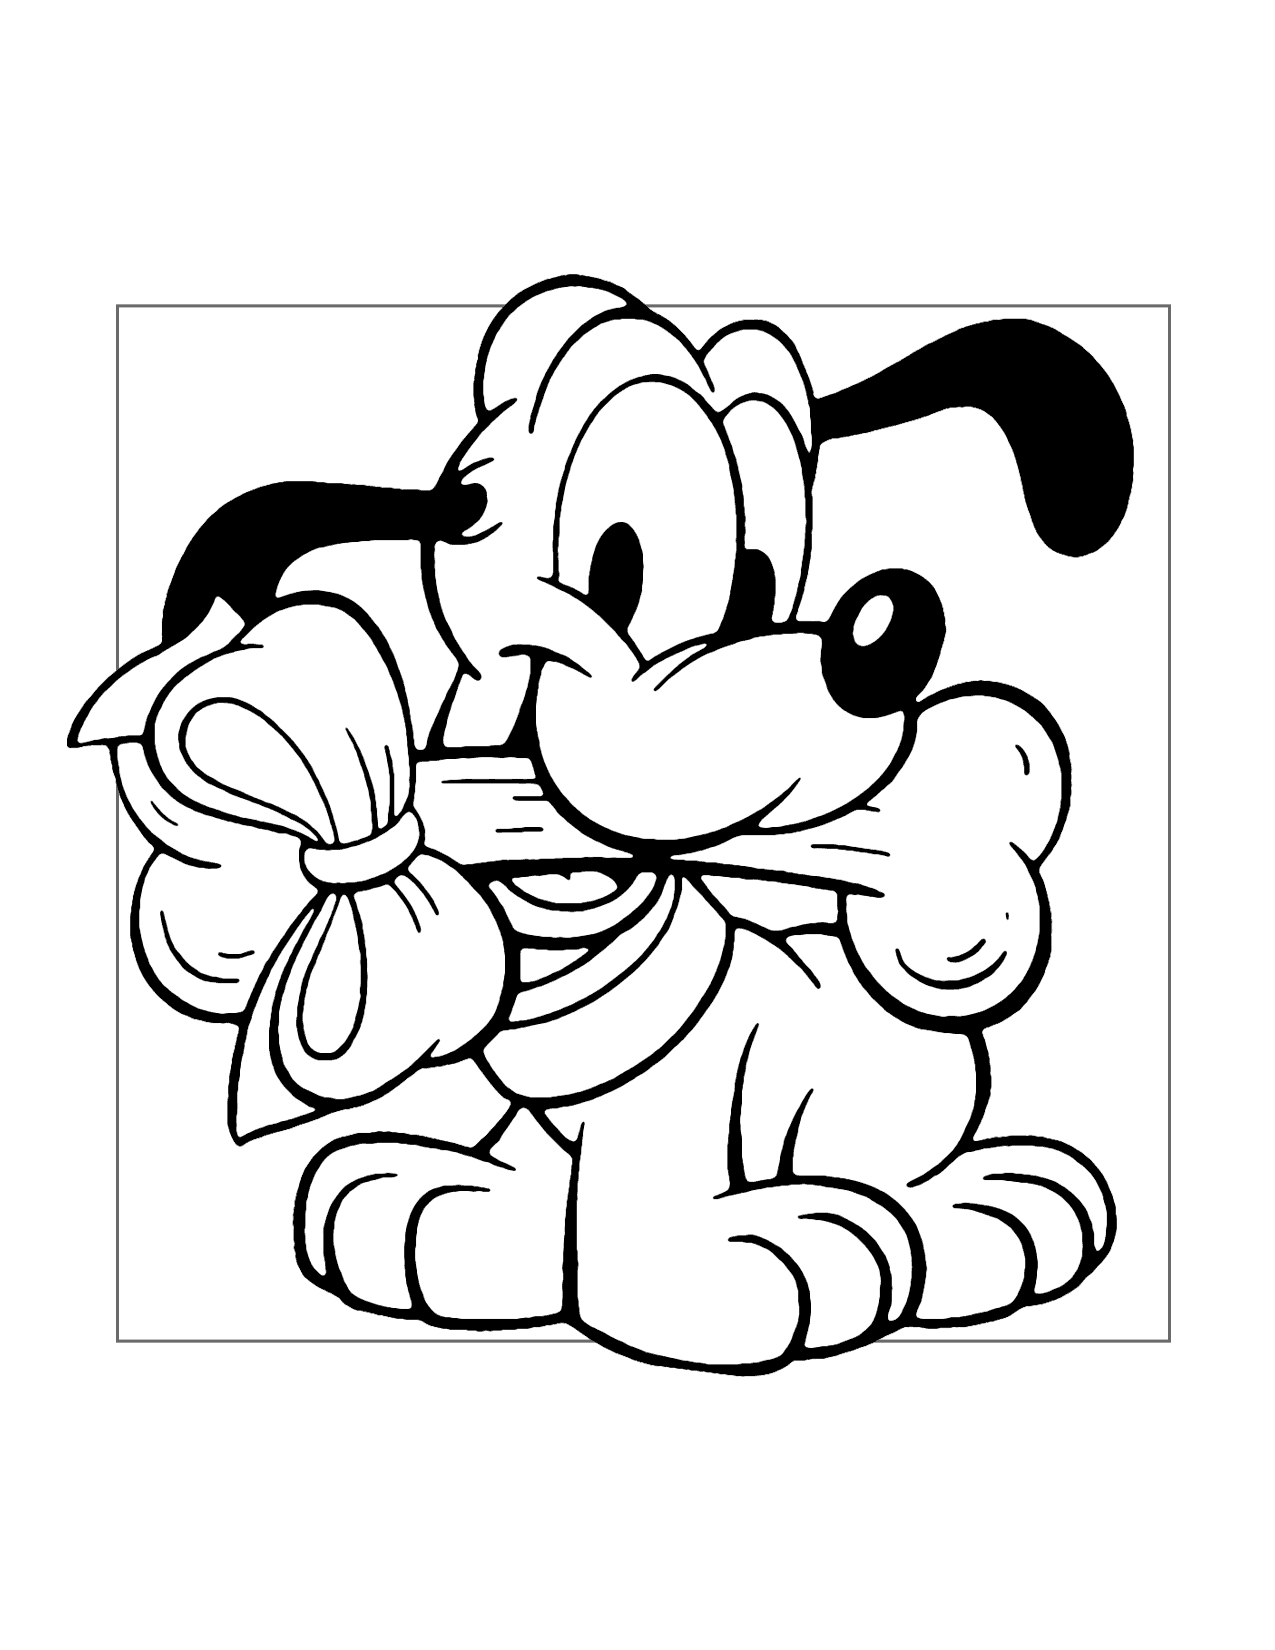 Pluto Has A Present Coloring Page